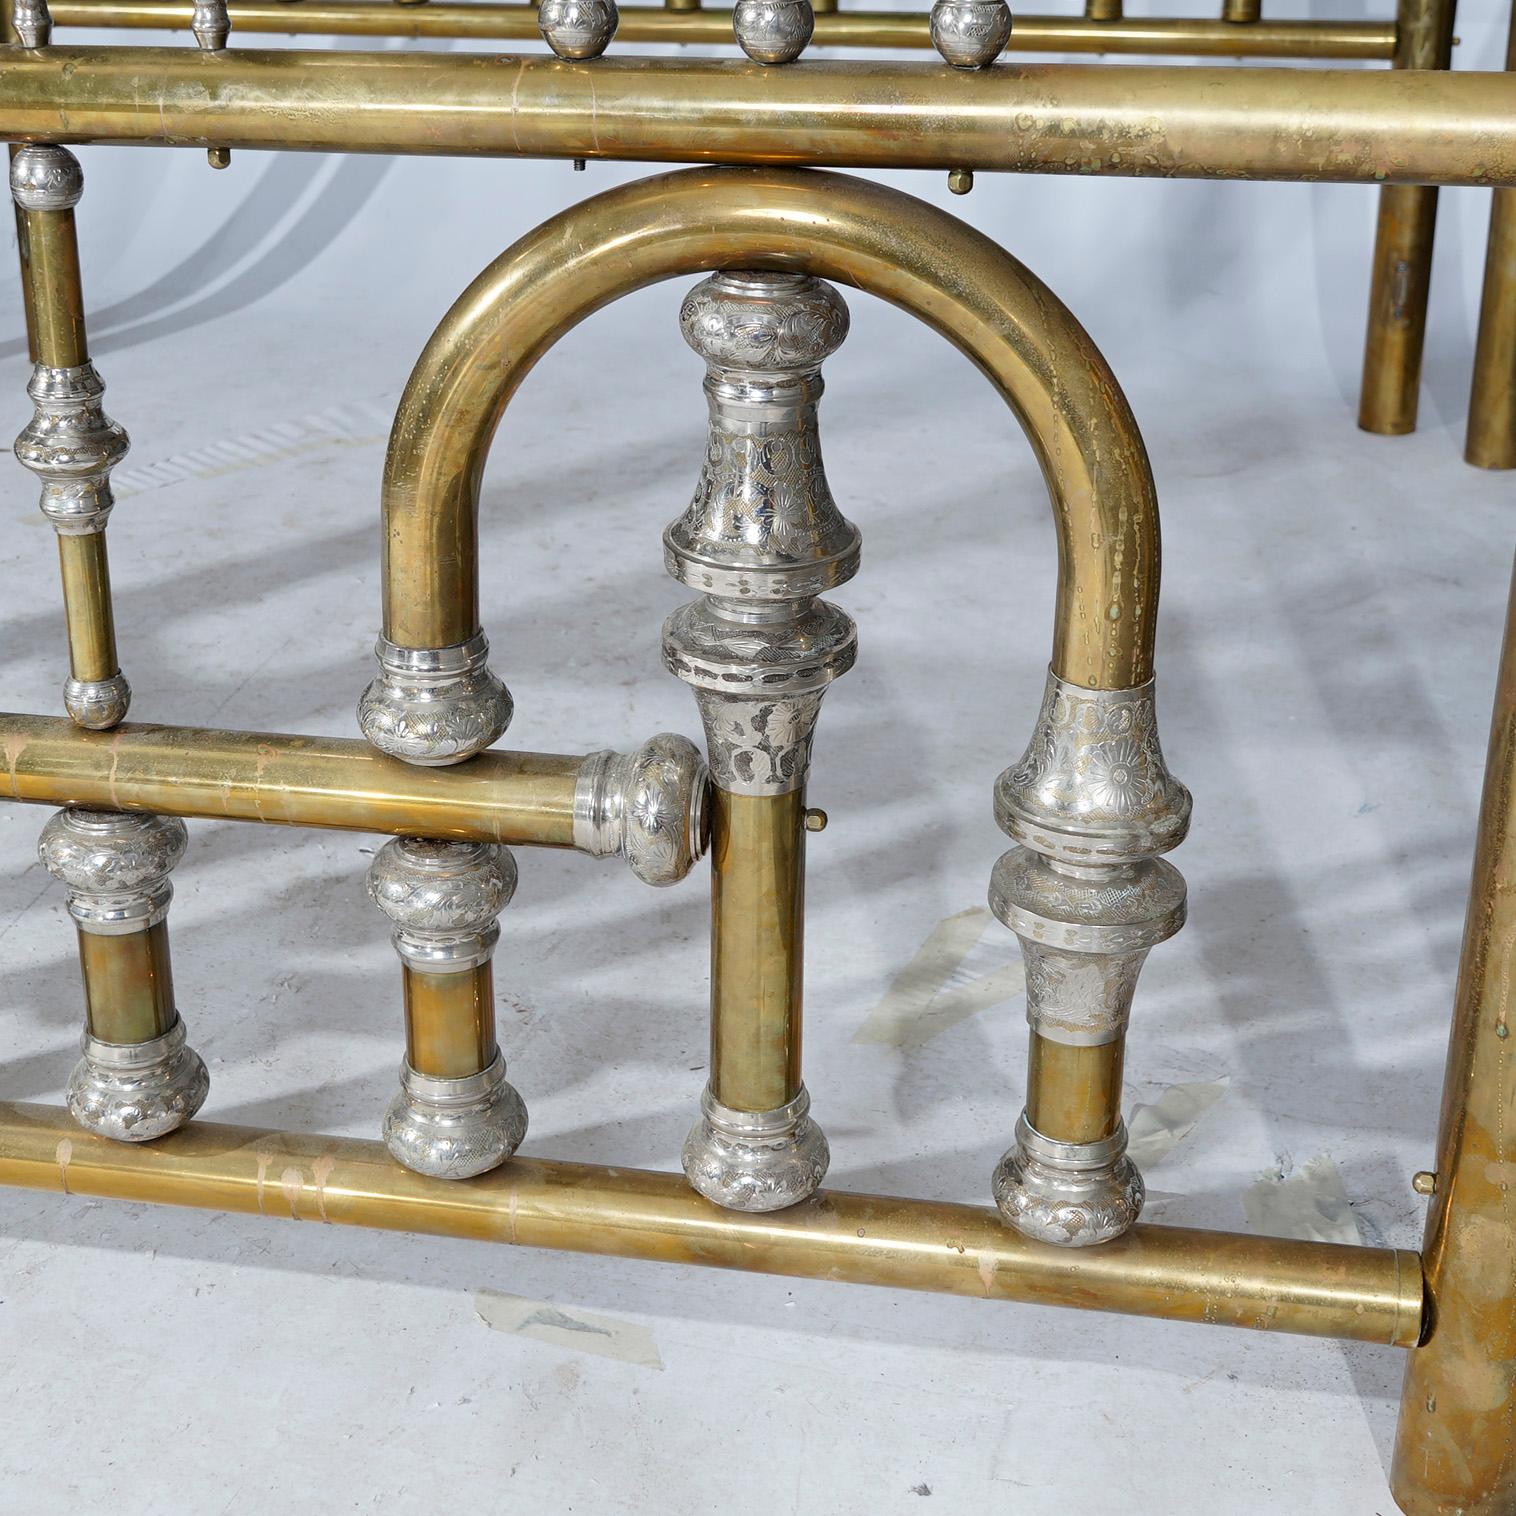 Monumental Regal Brass Bed with Mirrored Canopy & Silver Gilt Highlights, 20th C 8